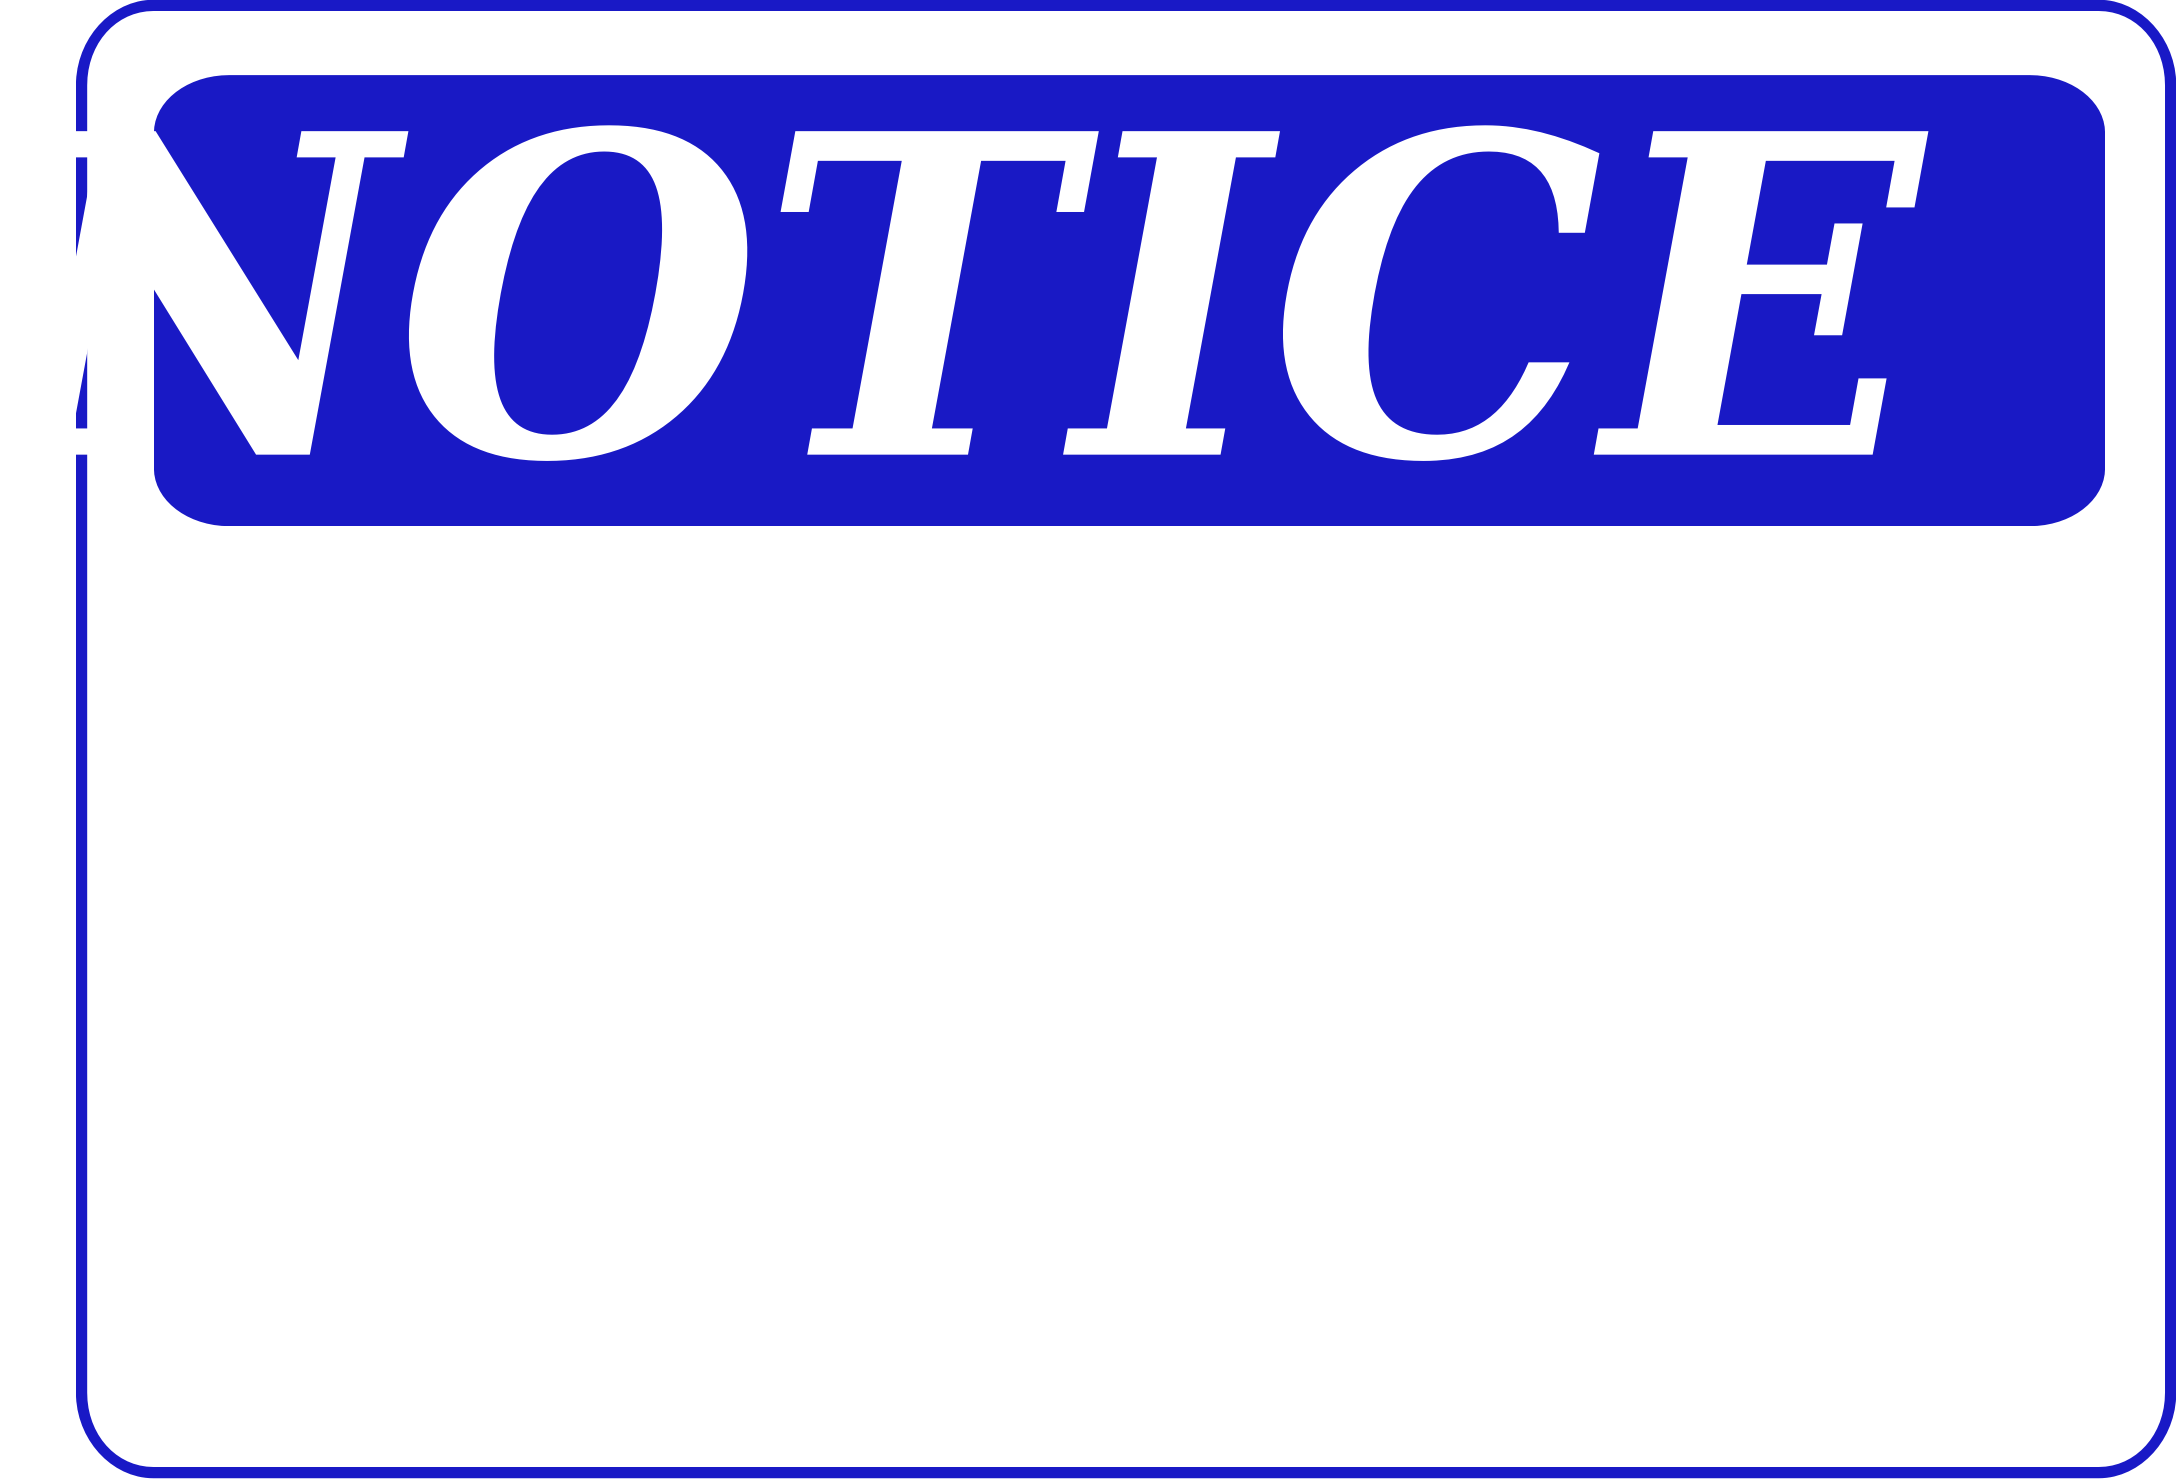 Blank Notice Sign drawing free image download